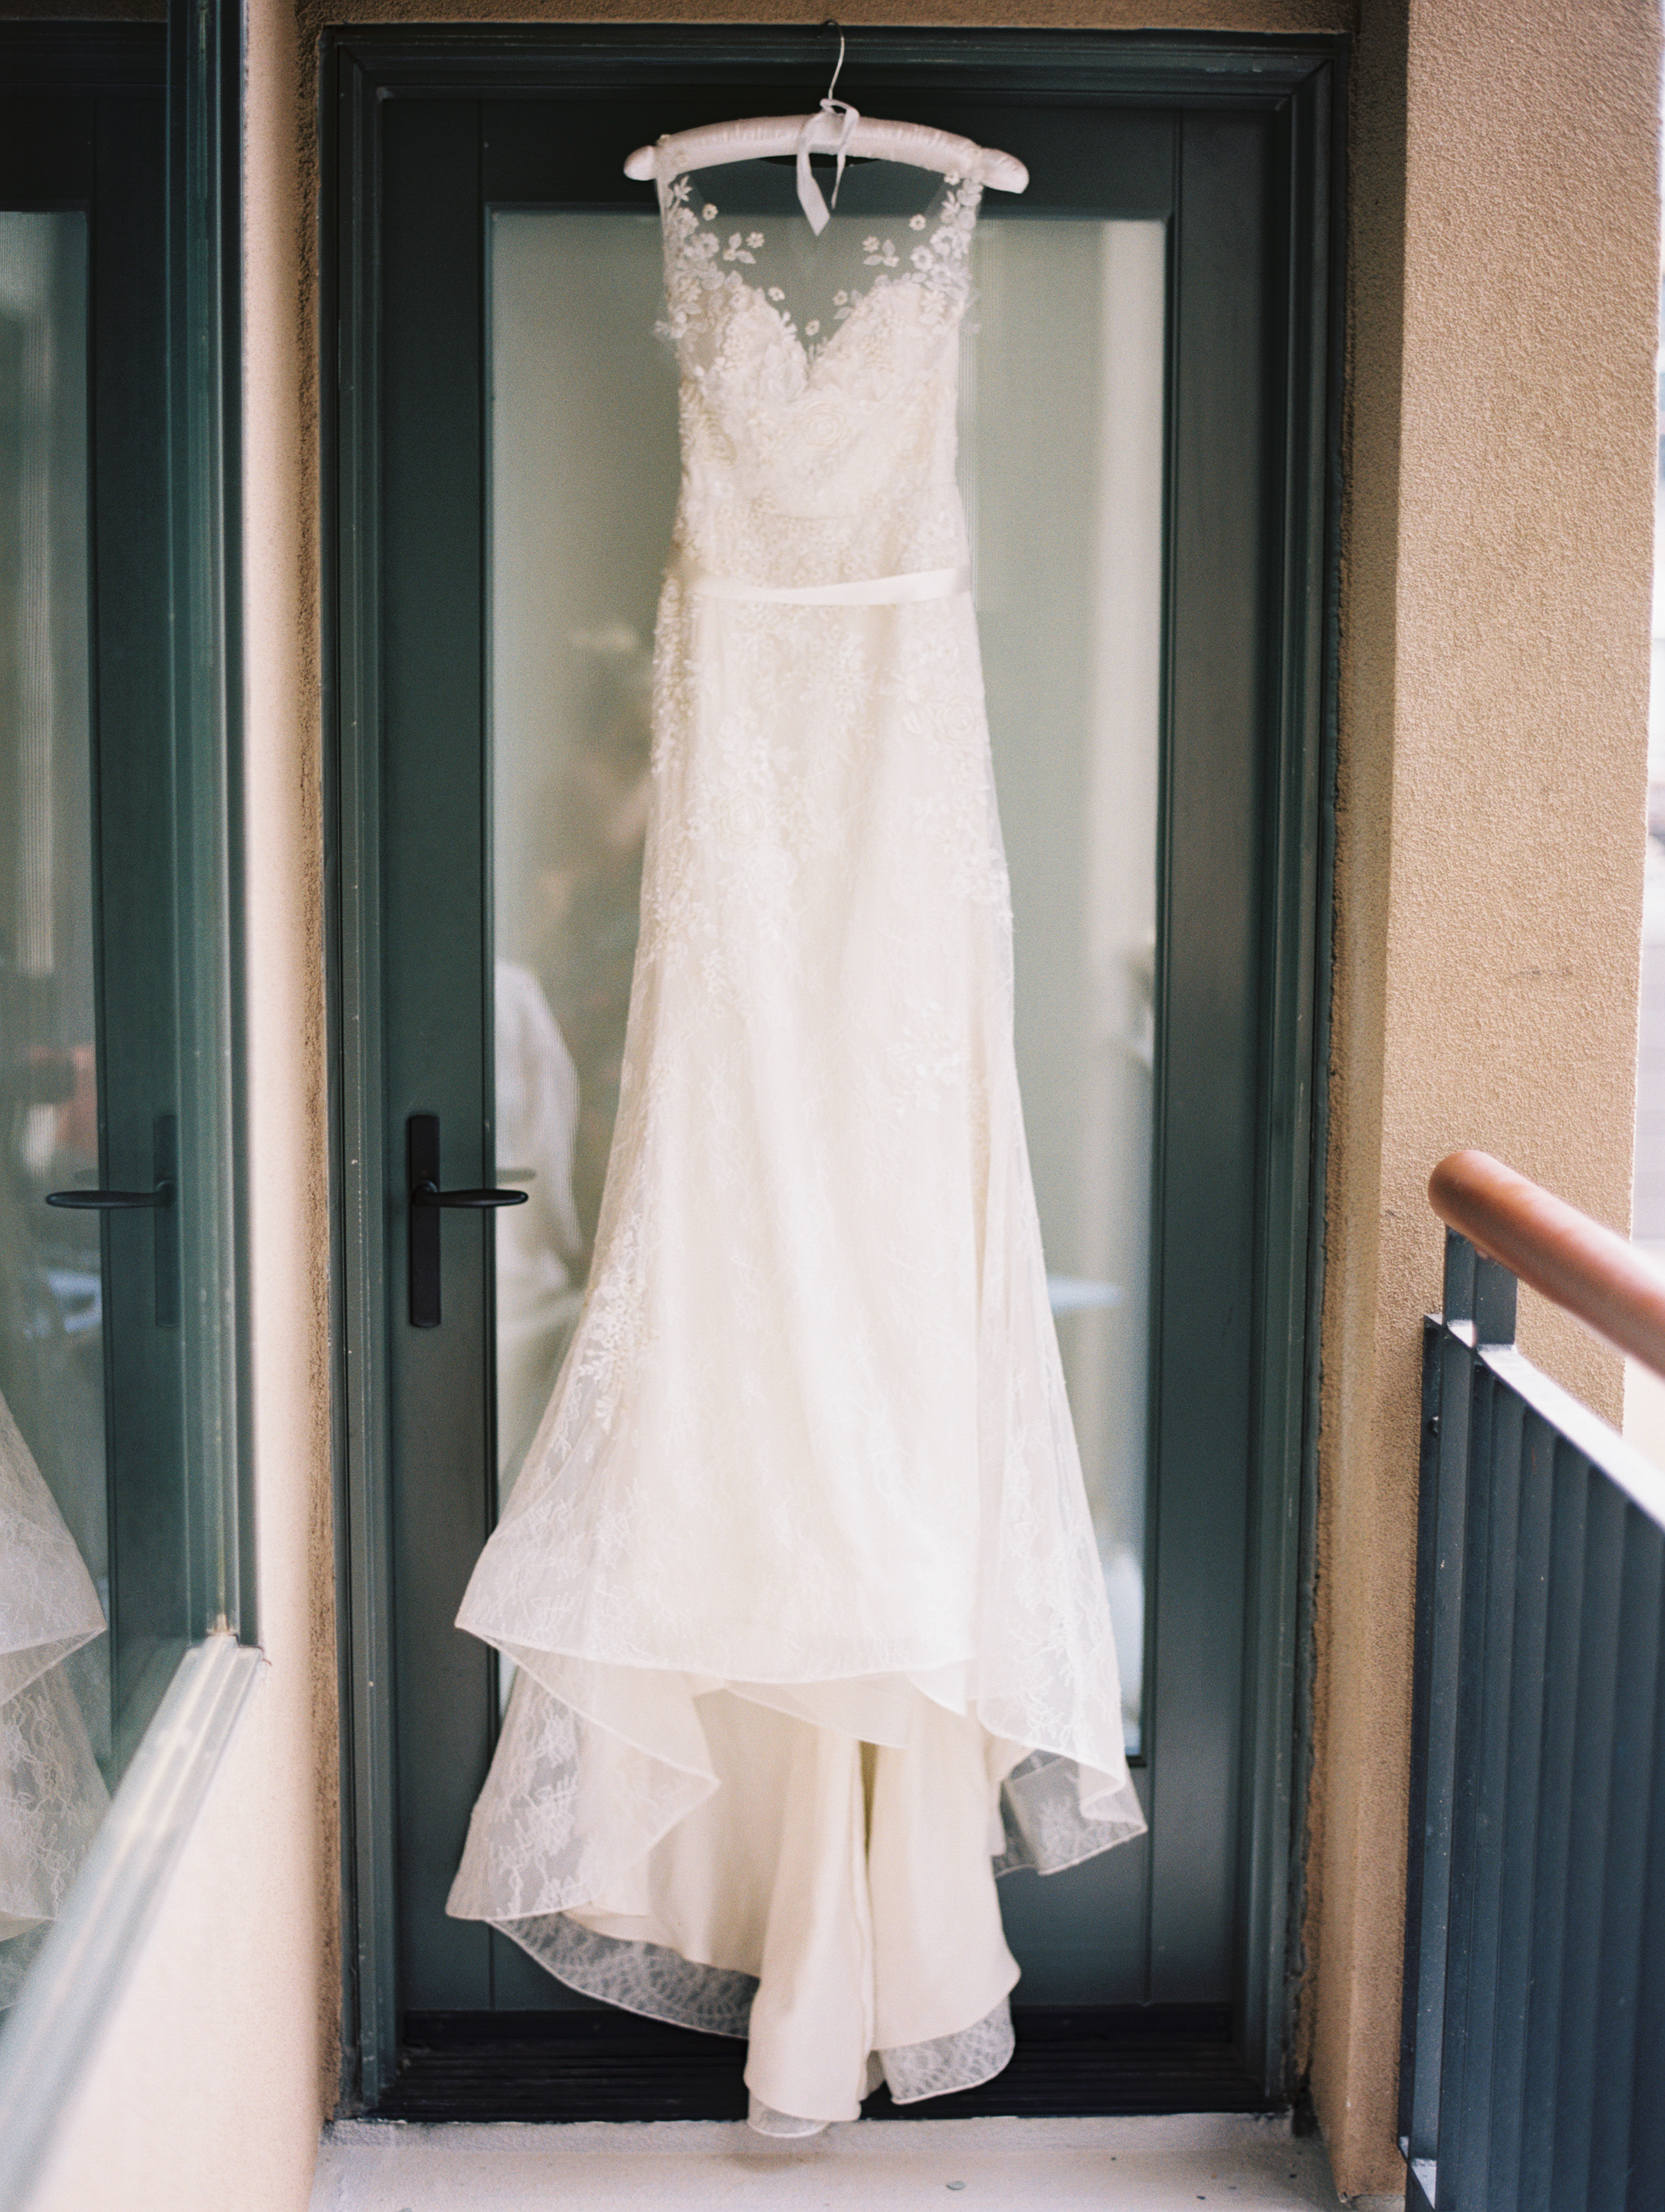  Leslie + Tyler | Liancarlo 6815 gown and Sassi Holford sash both from Little White Dress Bridal Shop in Denver |&nbsp; Cassidy Brooke Photography  